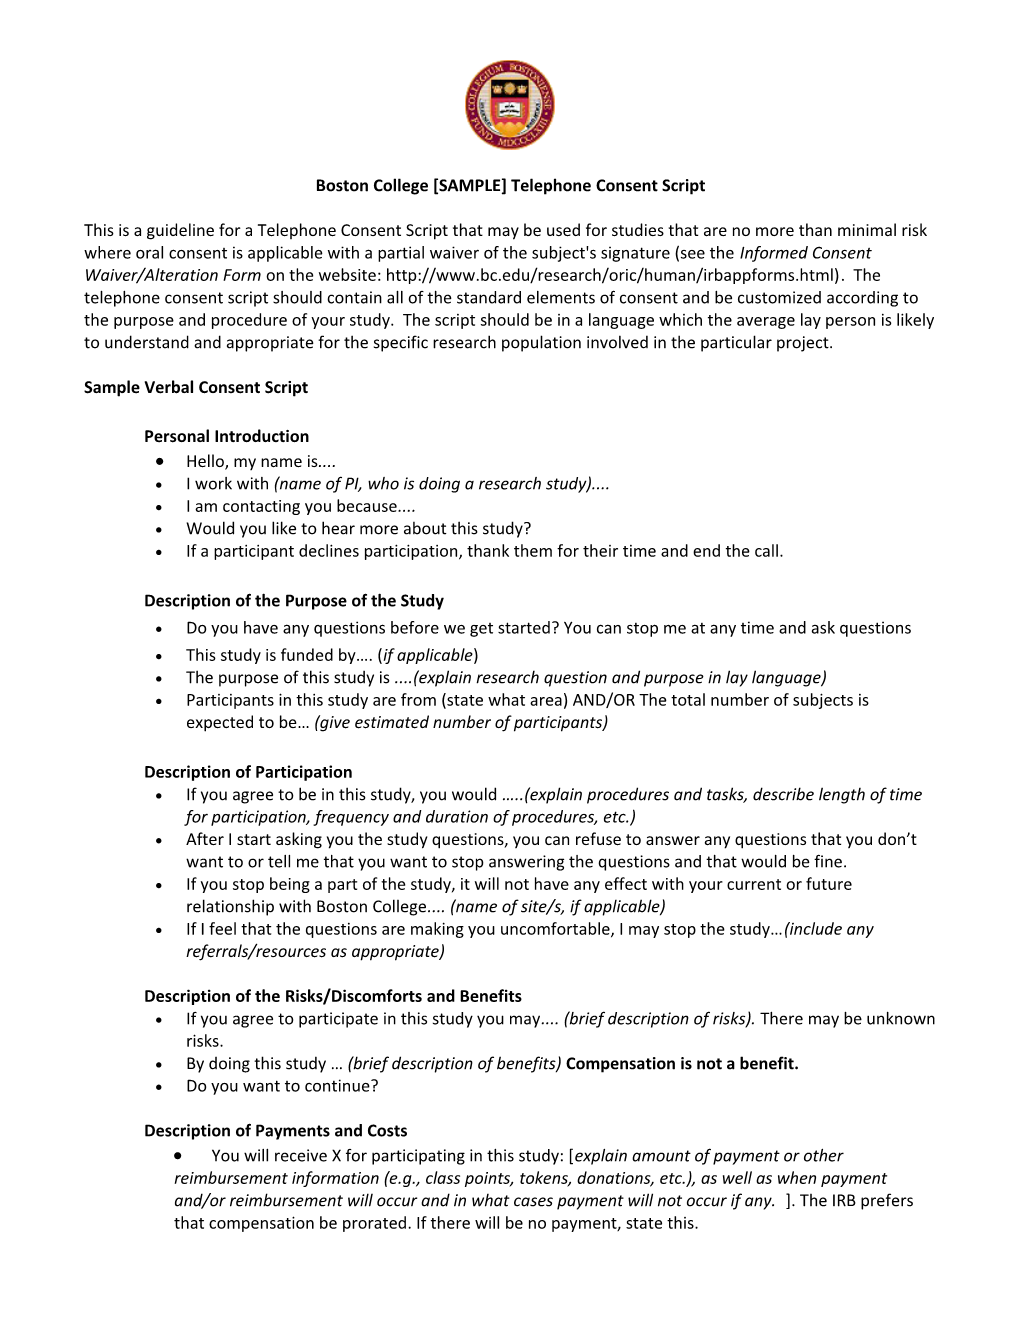 University of Southern Maine SAMPLE CONSENT FORM Format